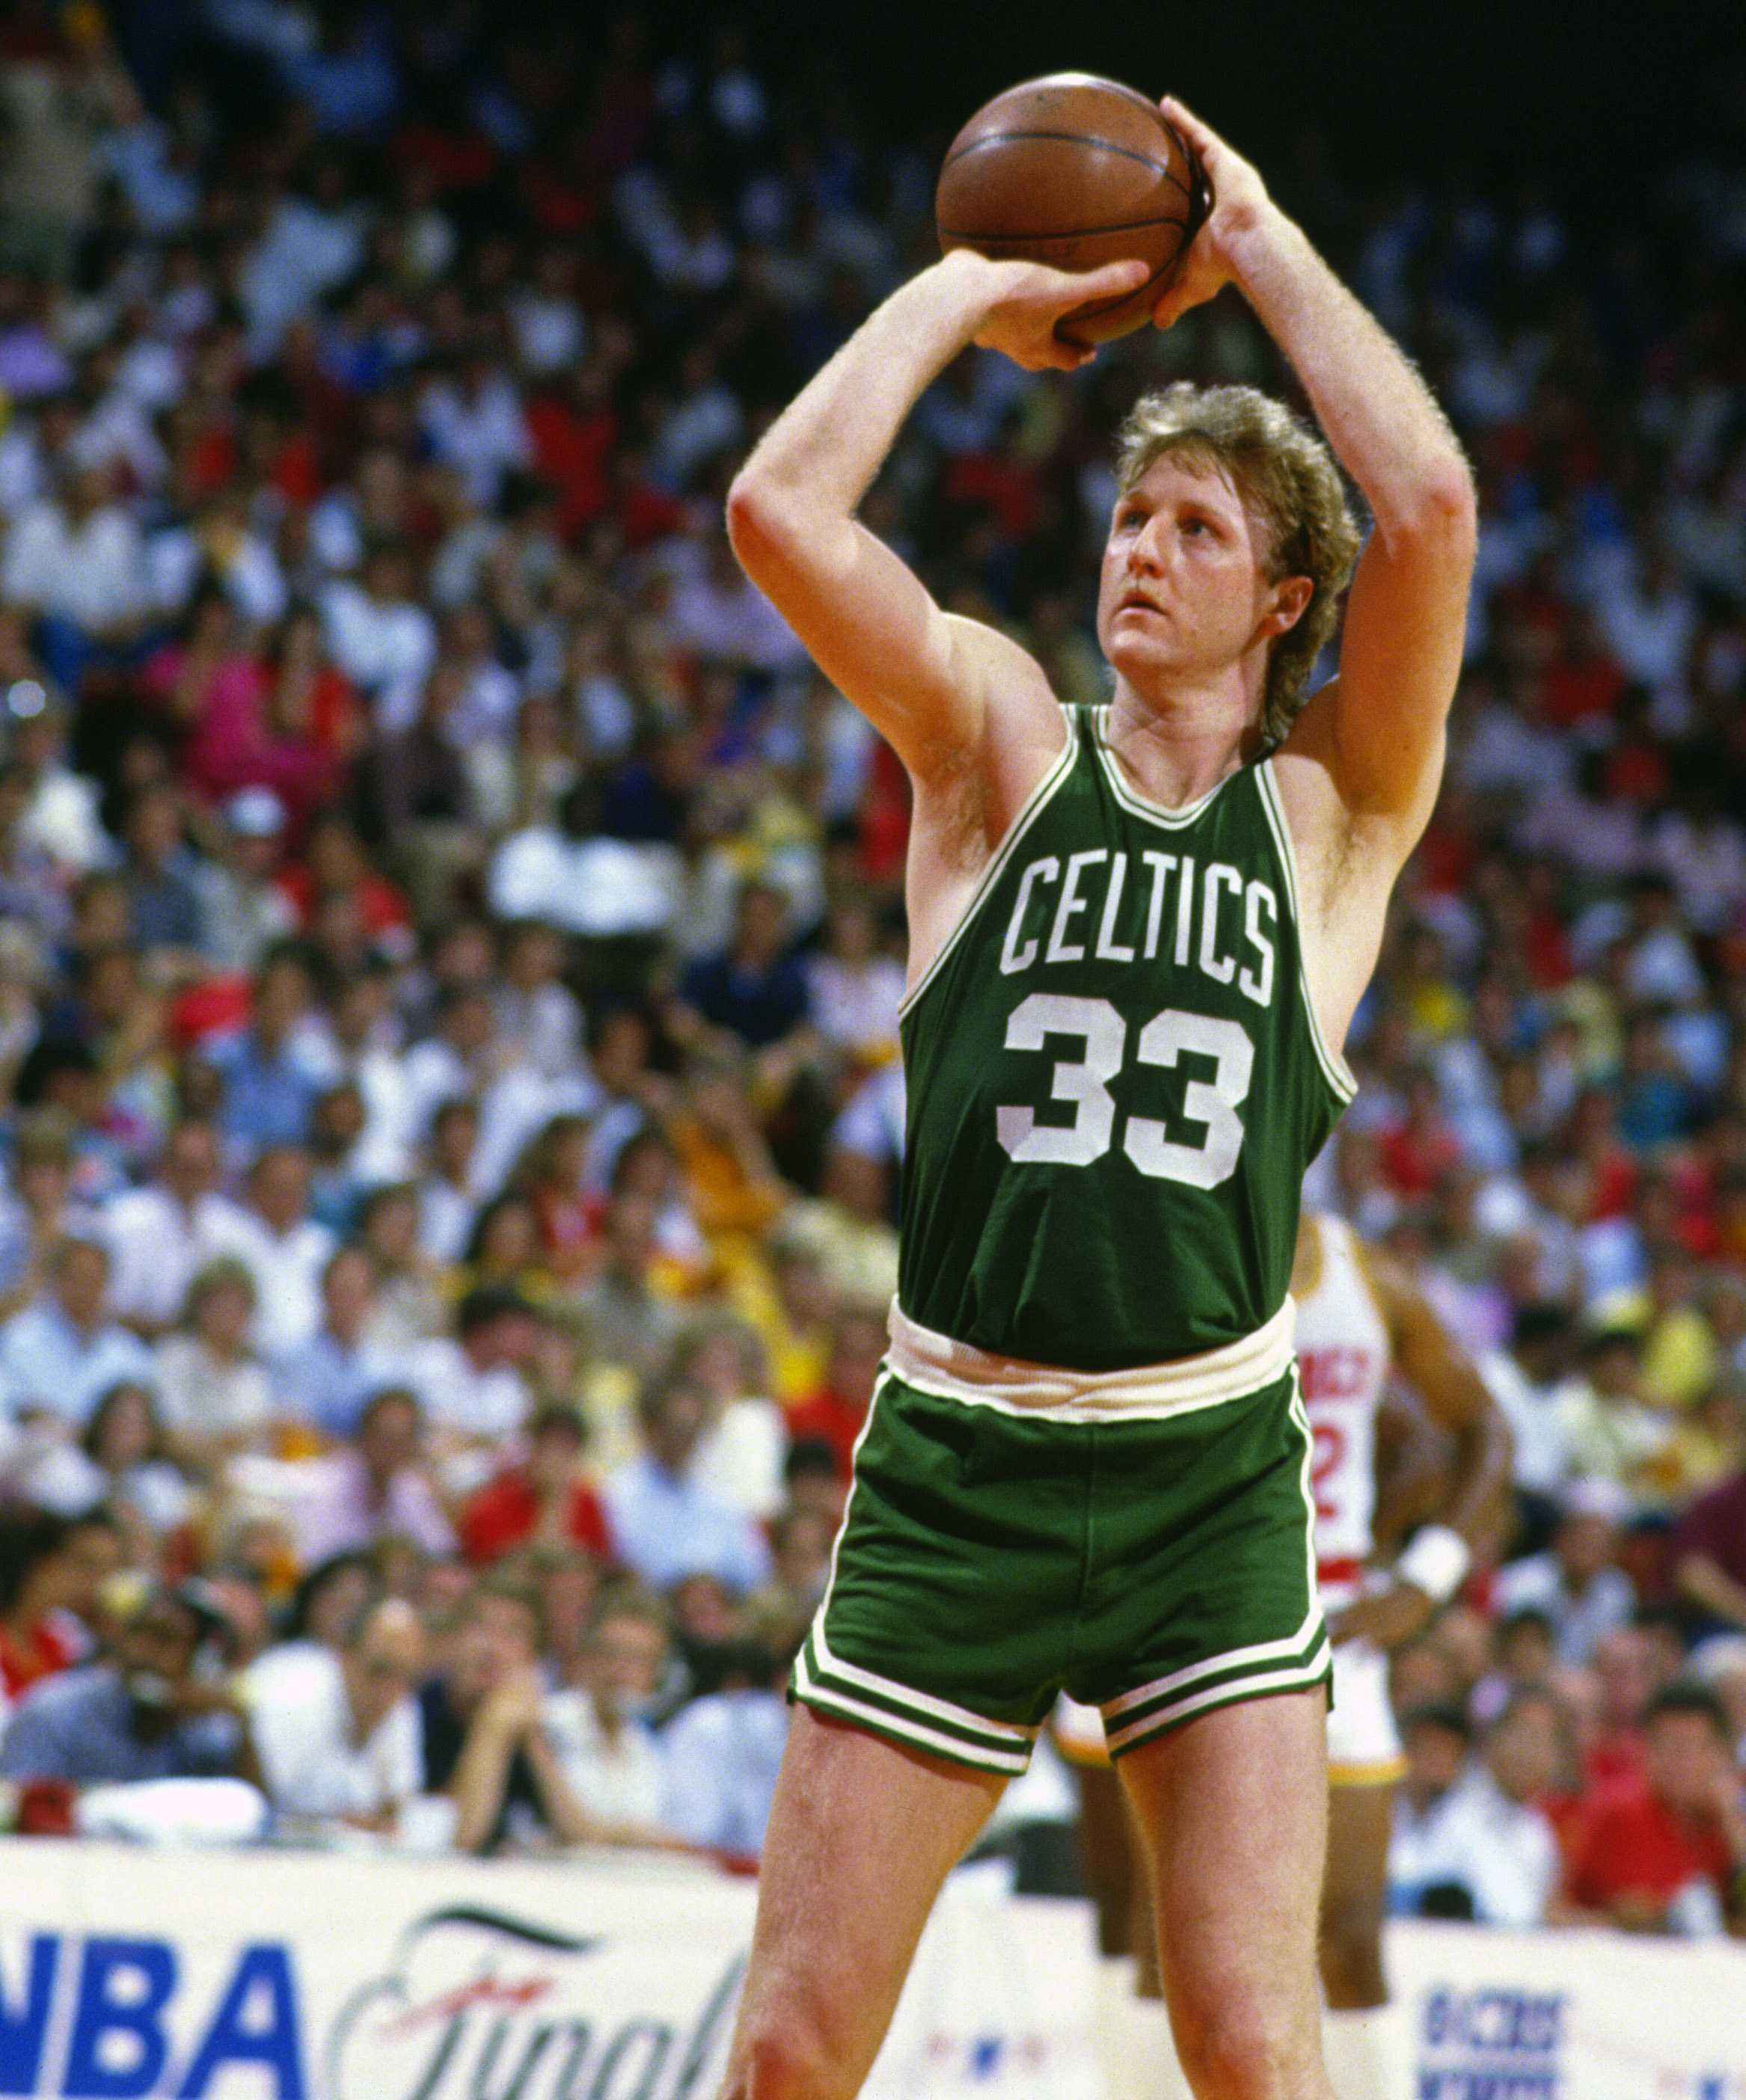 Larry bird - stats, age & height - biography